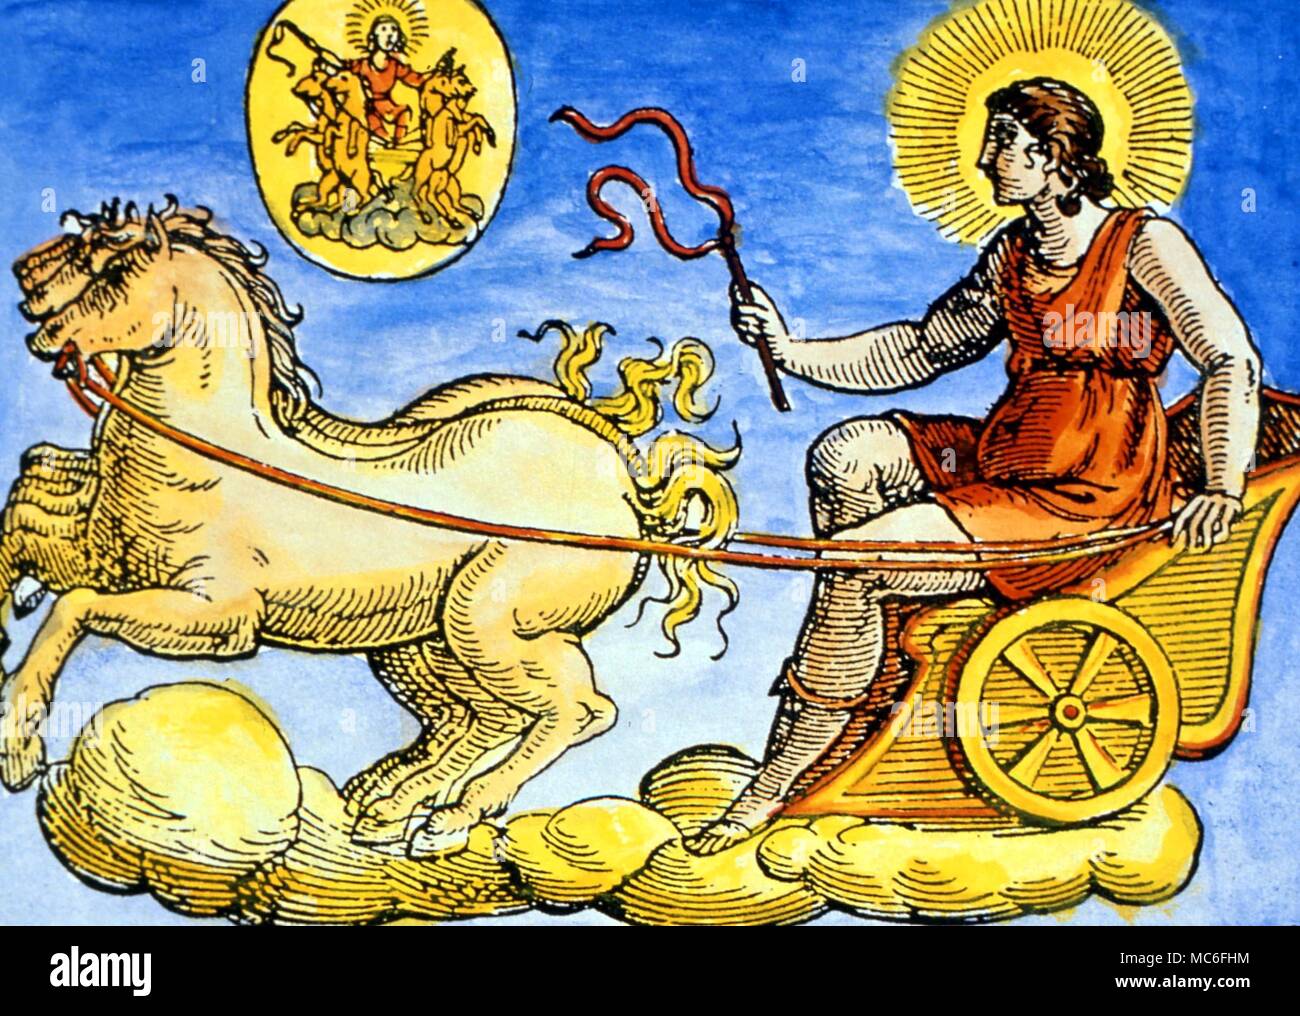 Helios, the Sun god, in his horse-drawn chariot. From Natalis Comitis, 'Mythologiae', Lib. V. 17th century edition. private collection Stock Photo